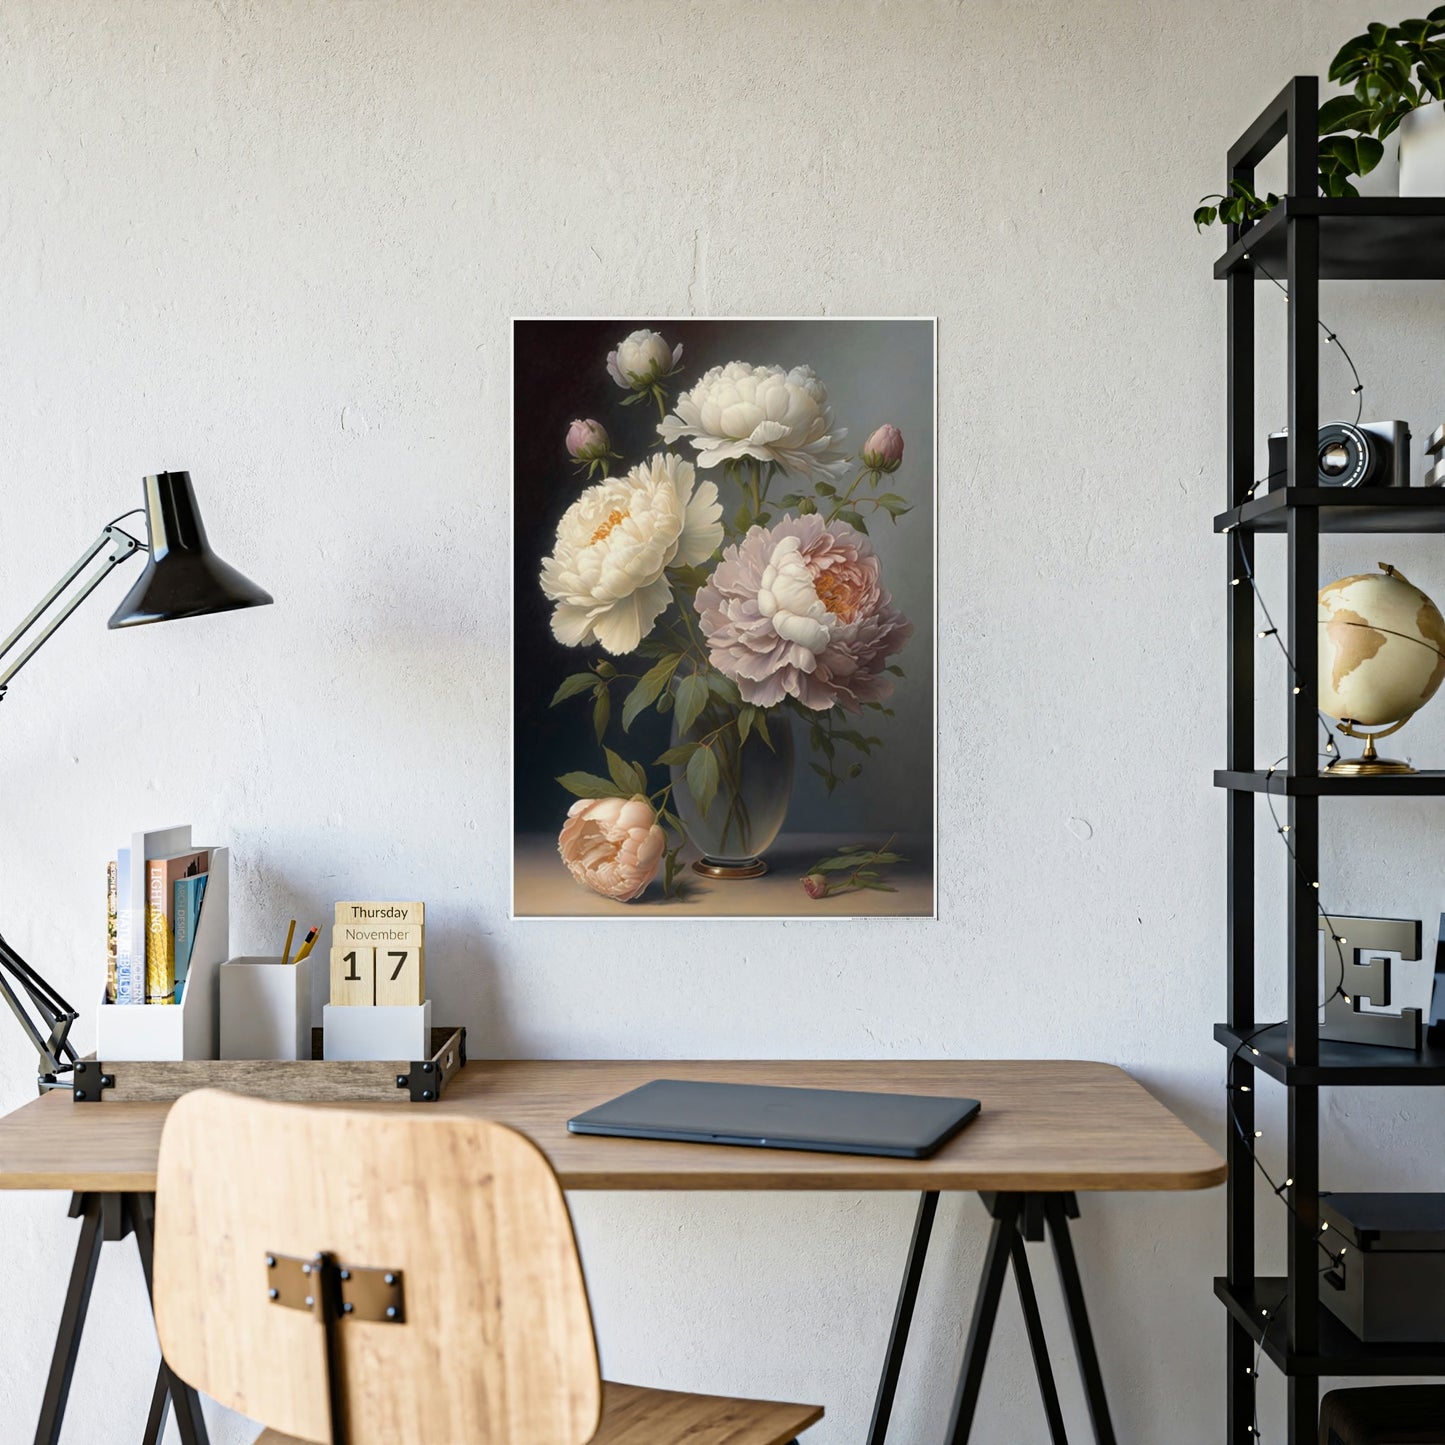 Peony Perfection: A Floral Fantasy